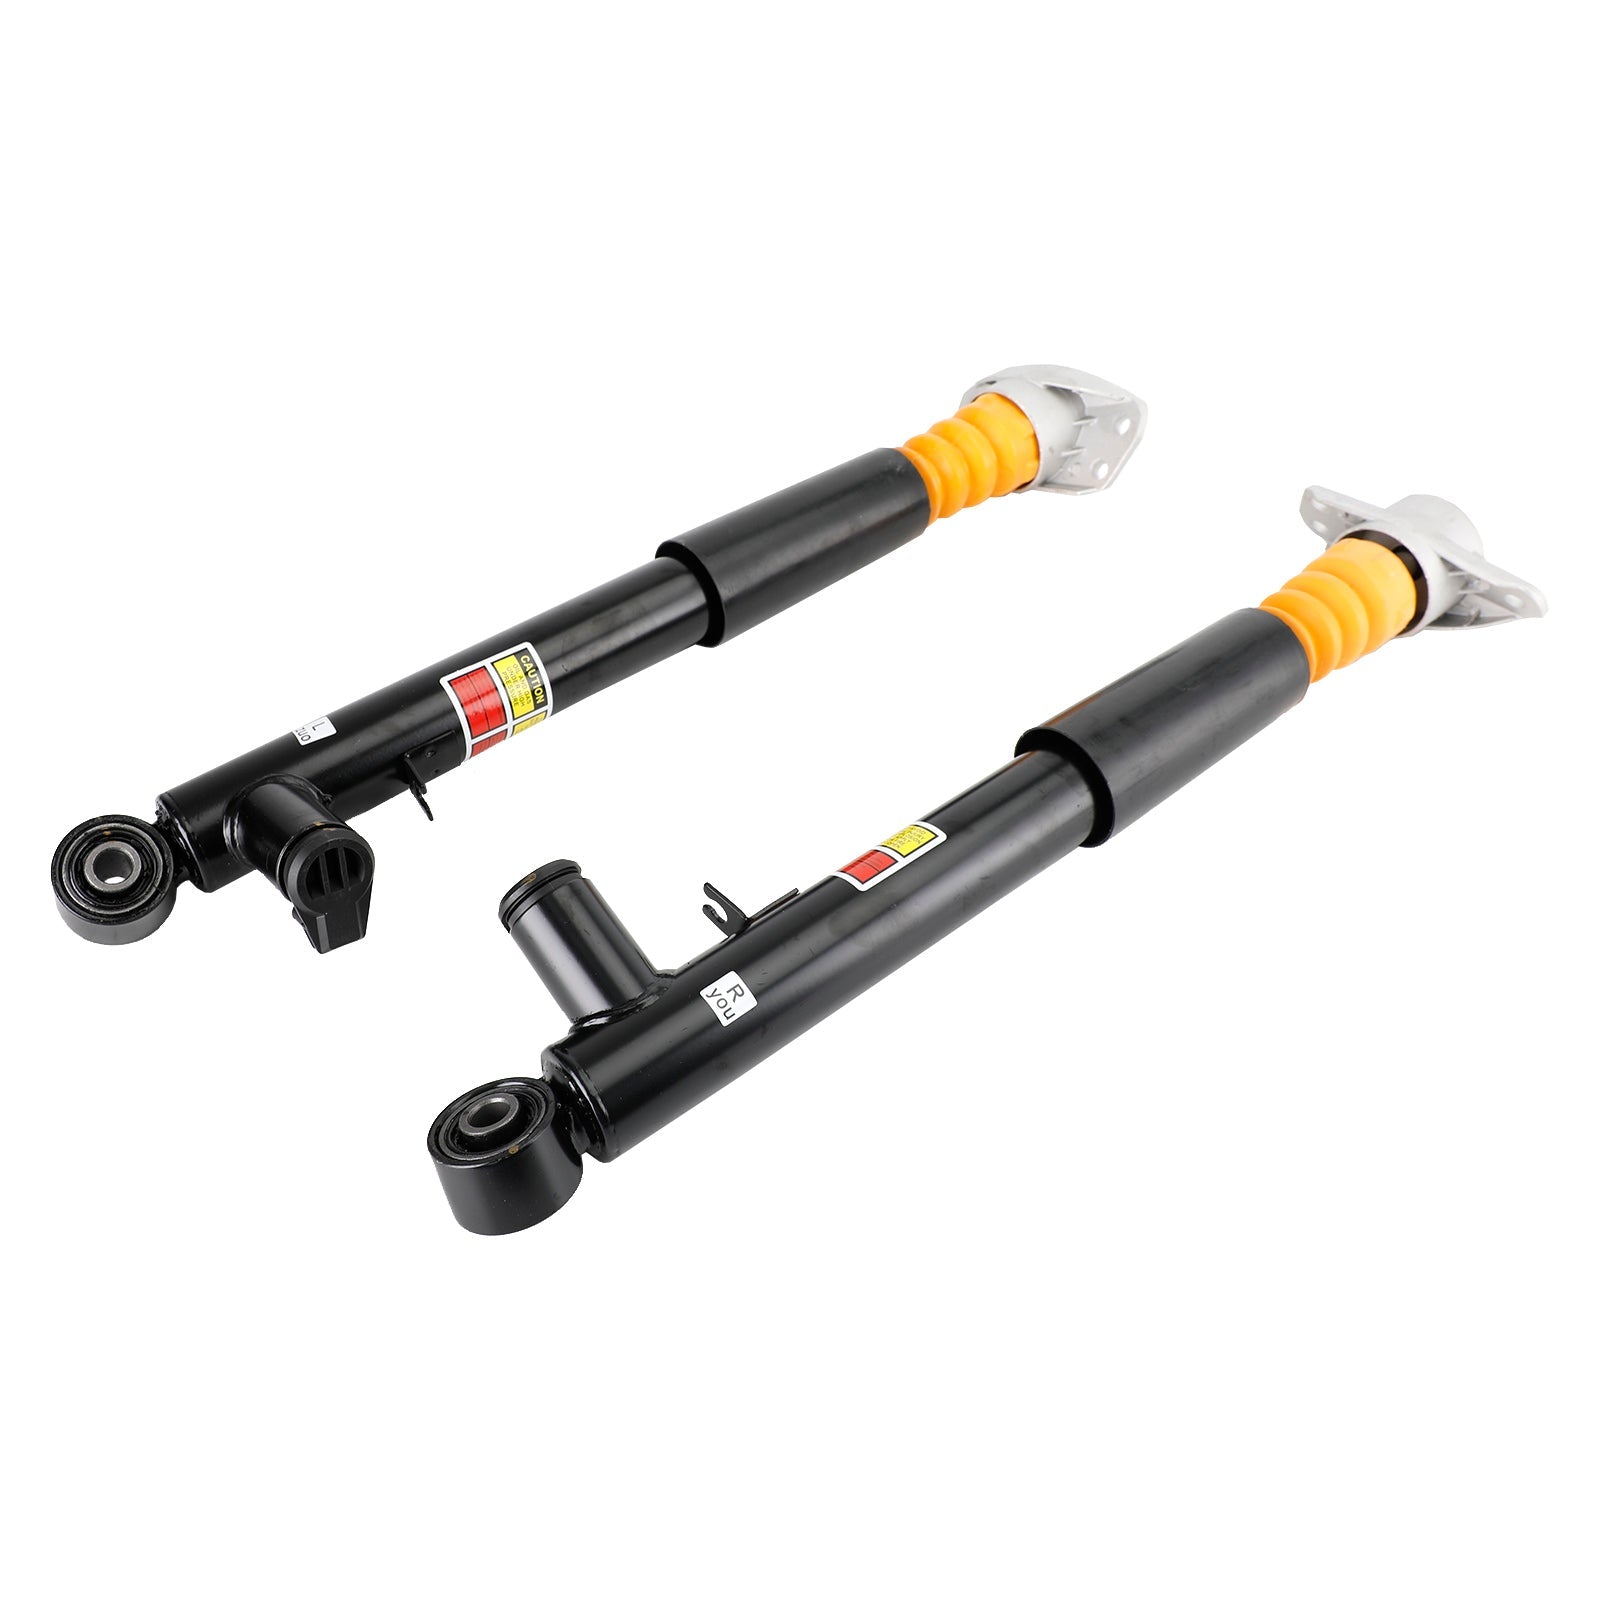 VW Scirocco FWD 2.0 TDi 2008-2018 Pair Rear Shock Absorber Struts w/Electric for 1K0512010H 1K0512009H